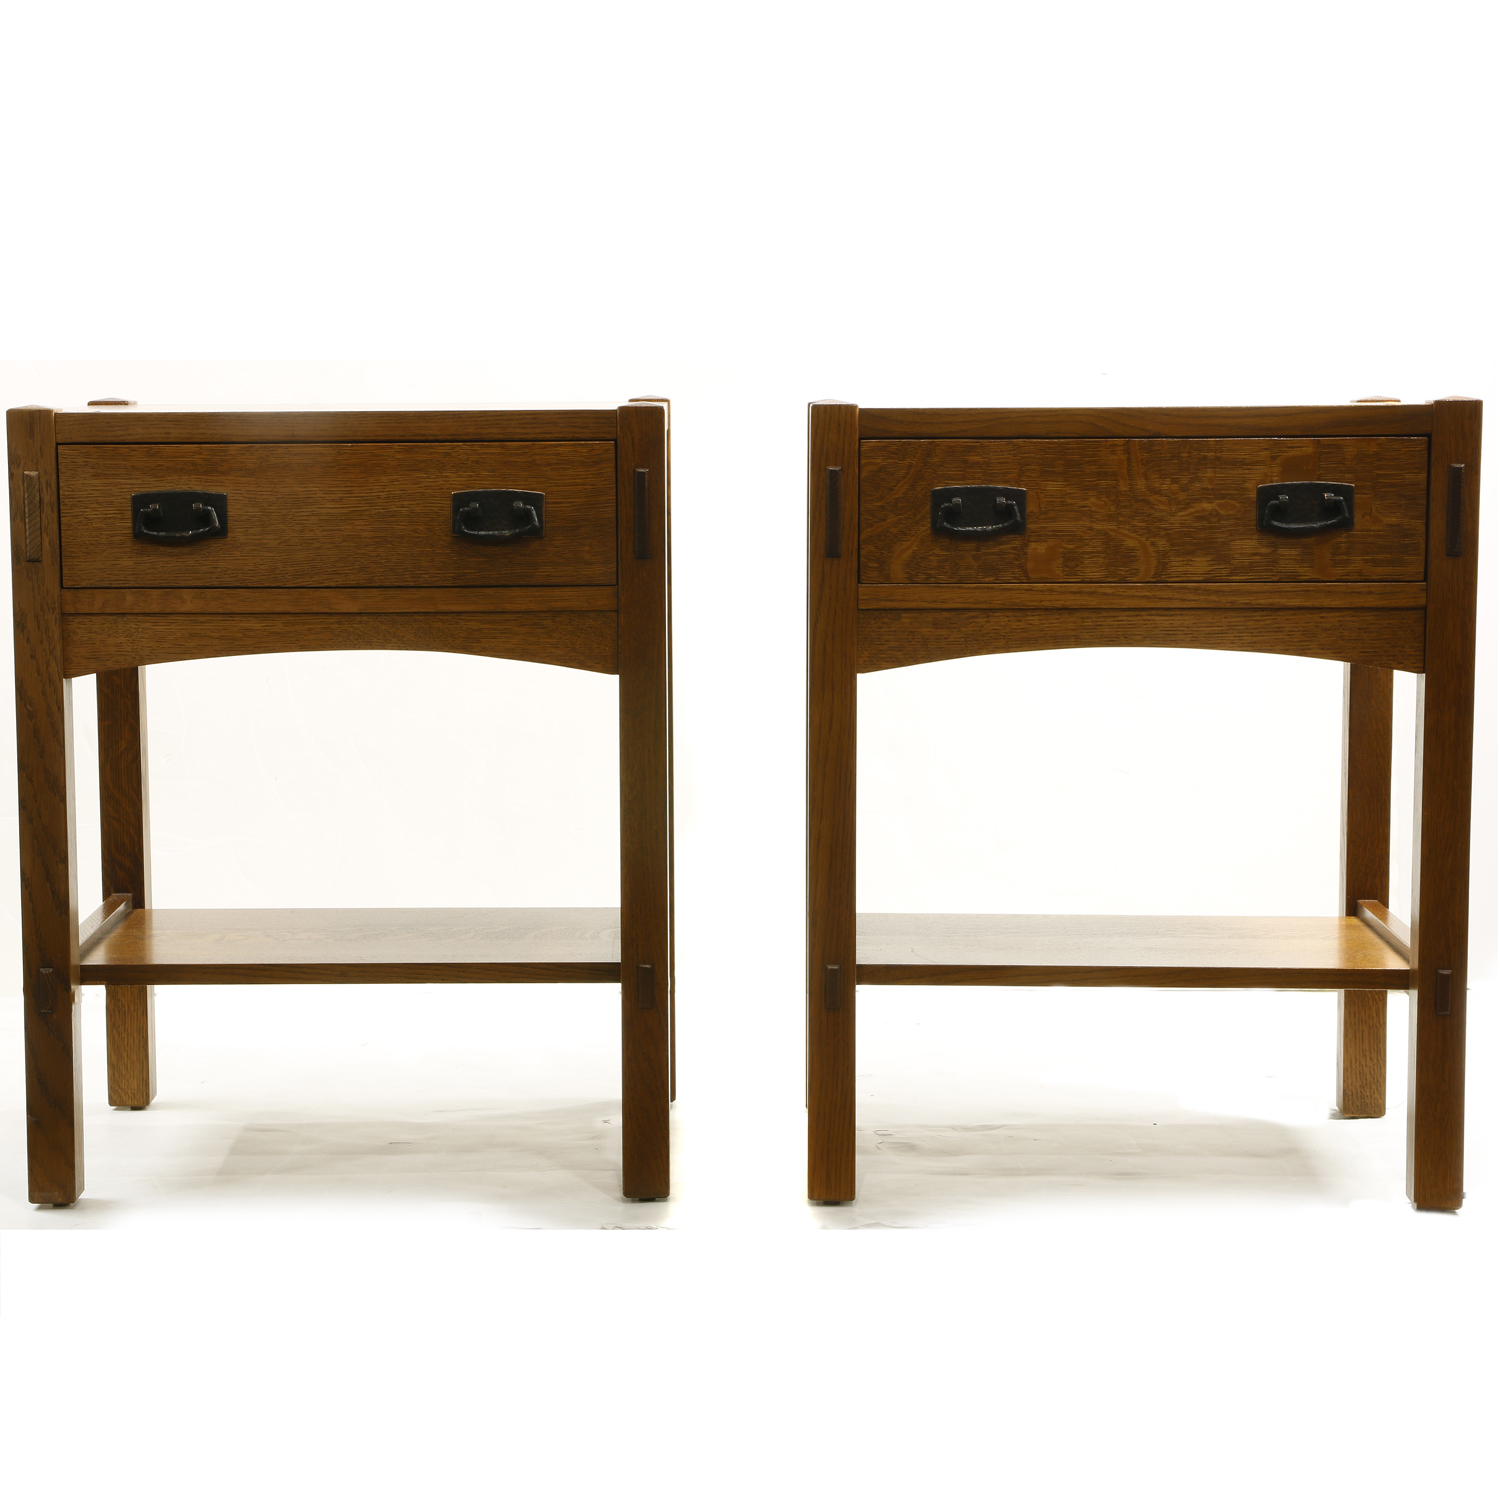 PAIR OF ARTS AND CRAFTS STYLE STICKLEY